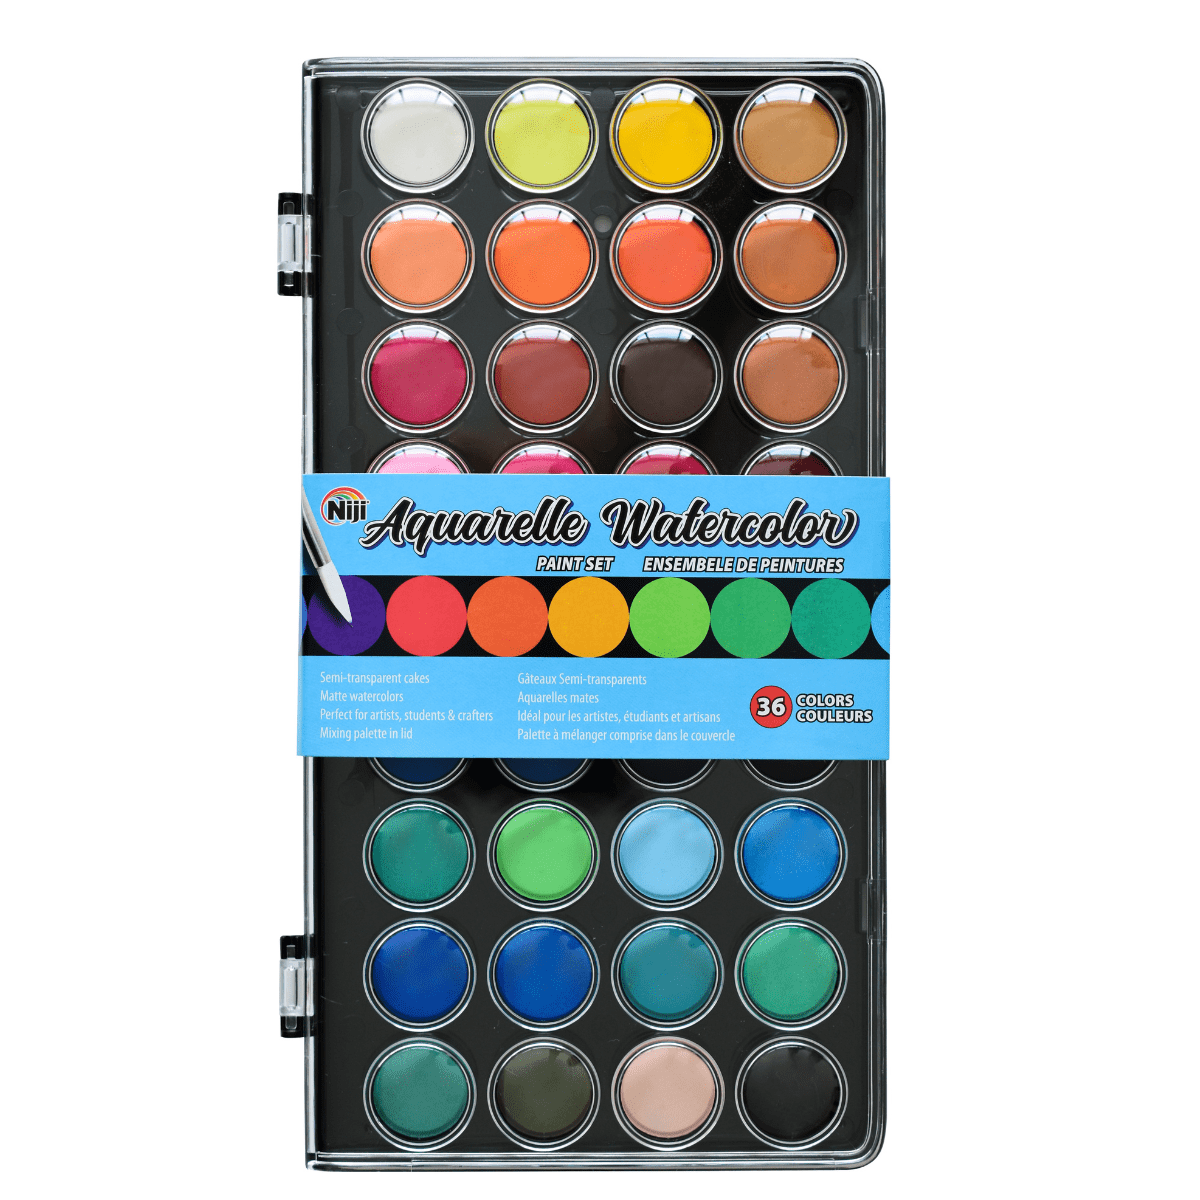 Yasutomo Pearlescent Watercolor Paint Cakes 21/Pkg-Assorted Colors -  031248995933